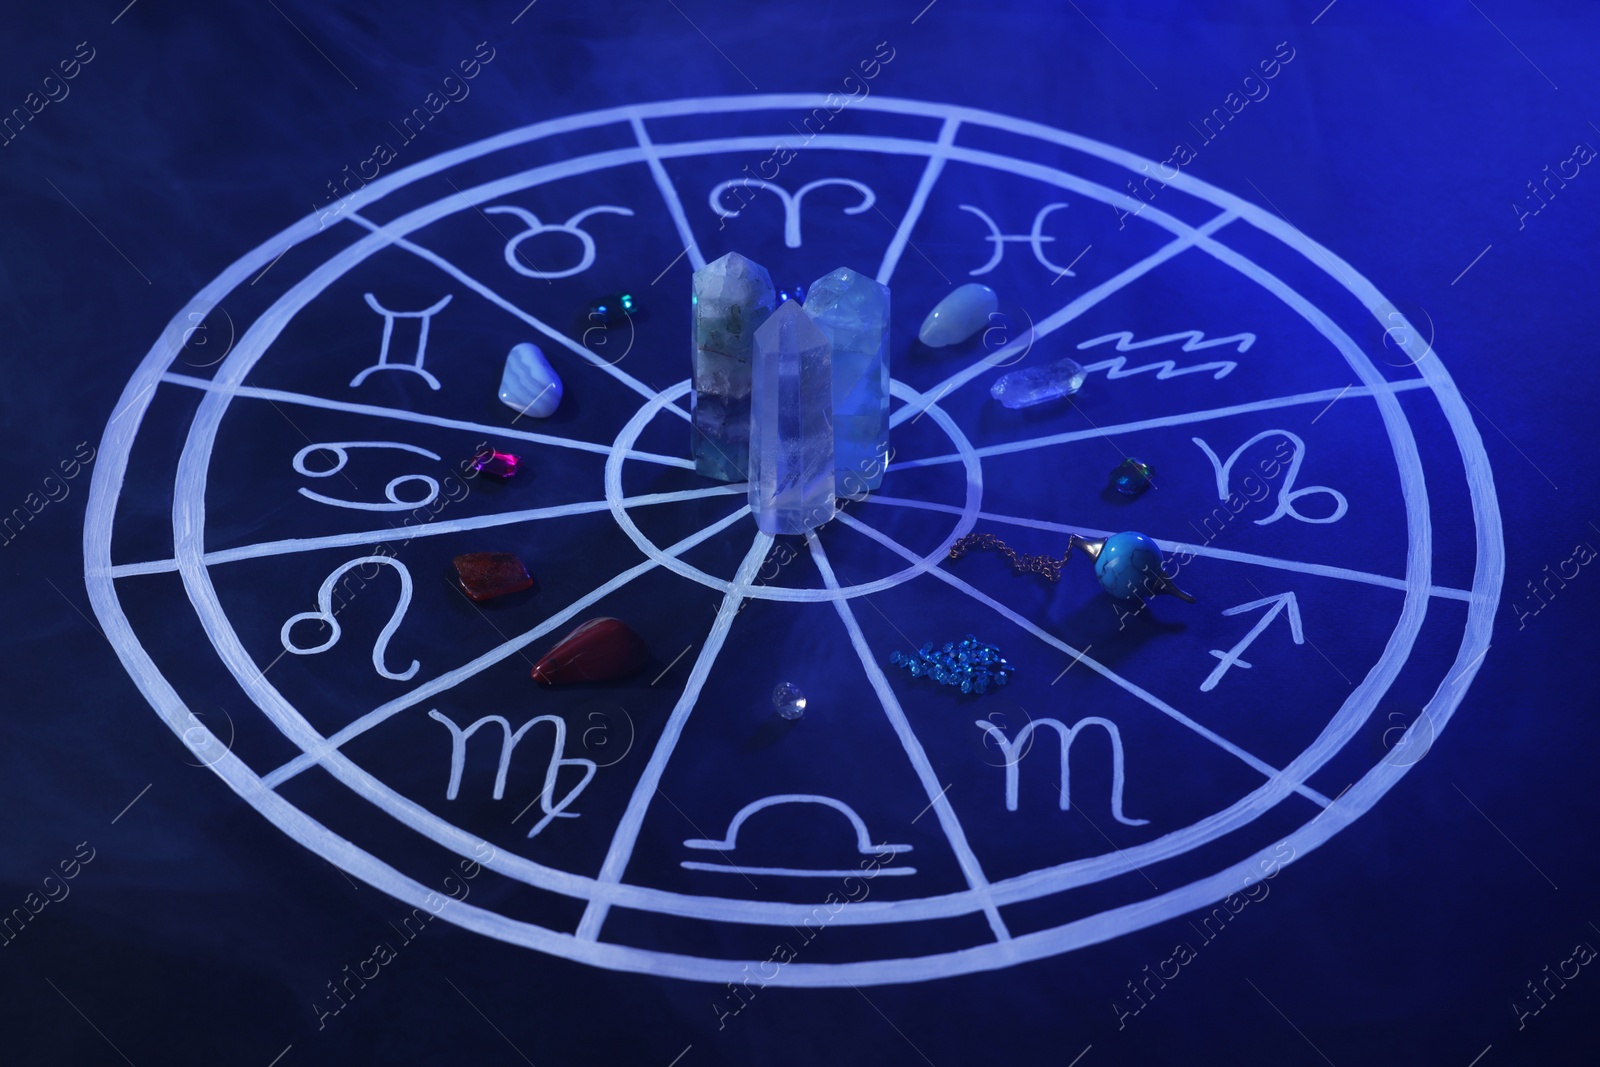 Photo of Natural stones for zodiac signs and drawn astrology chart on dark blue background